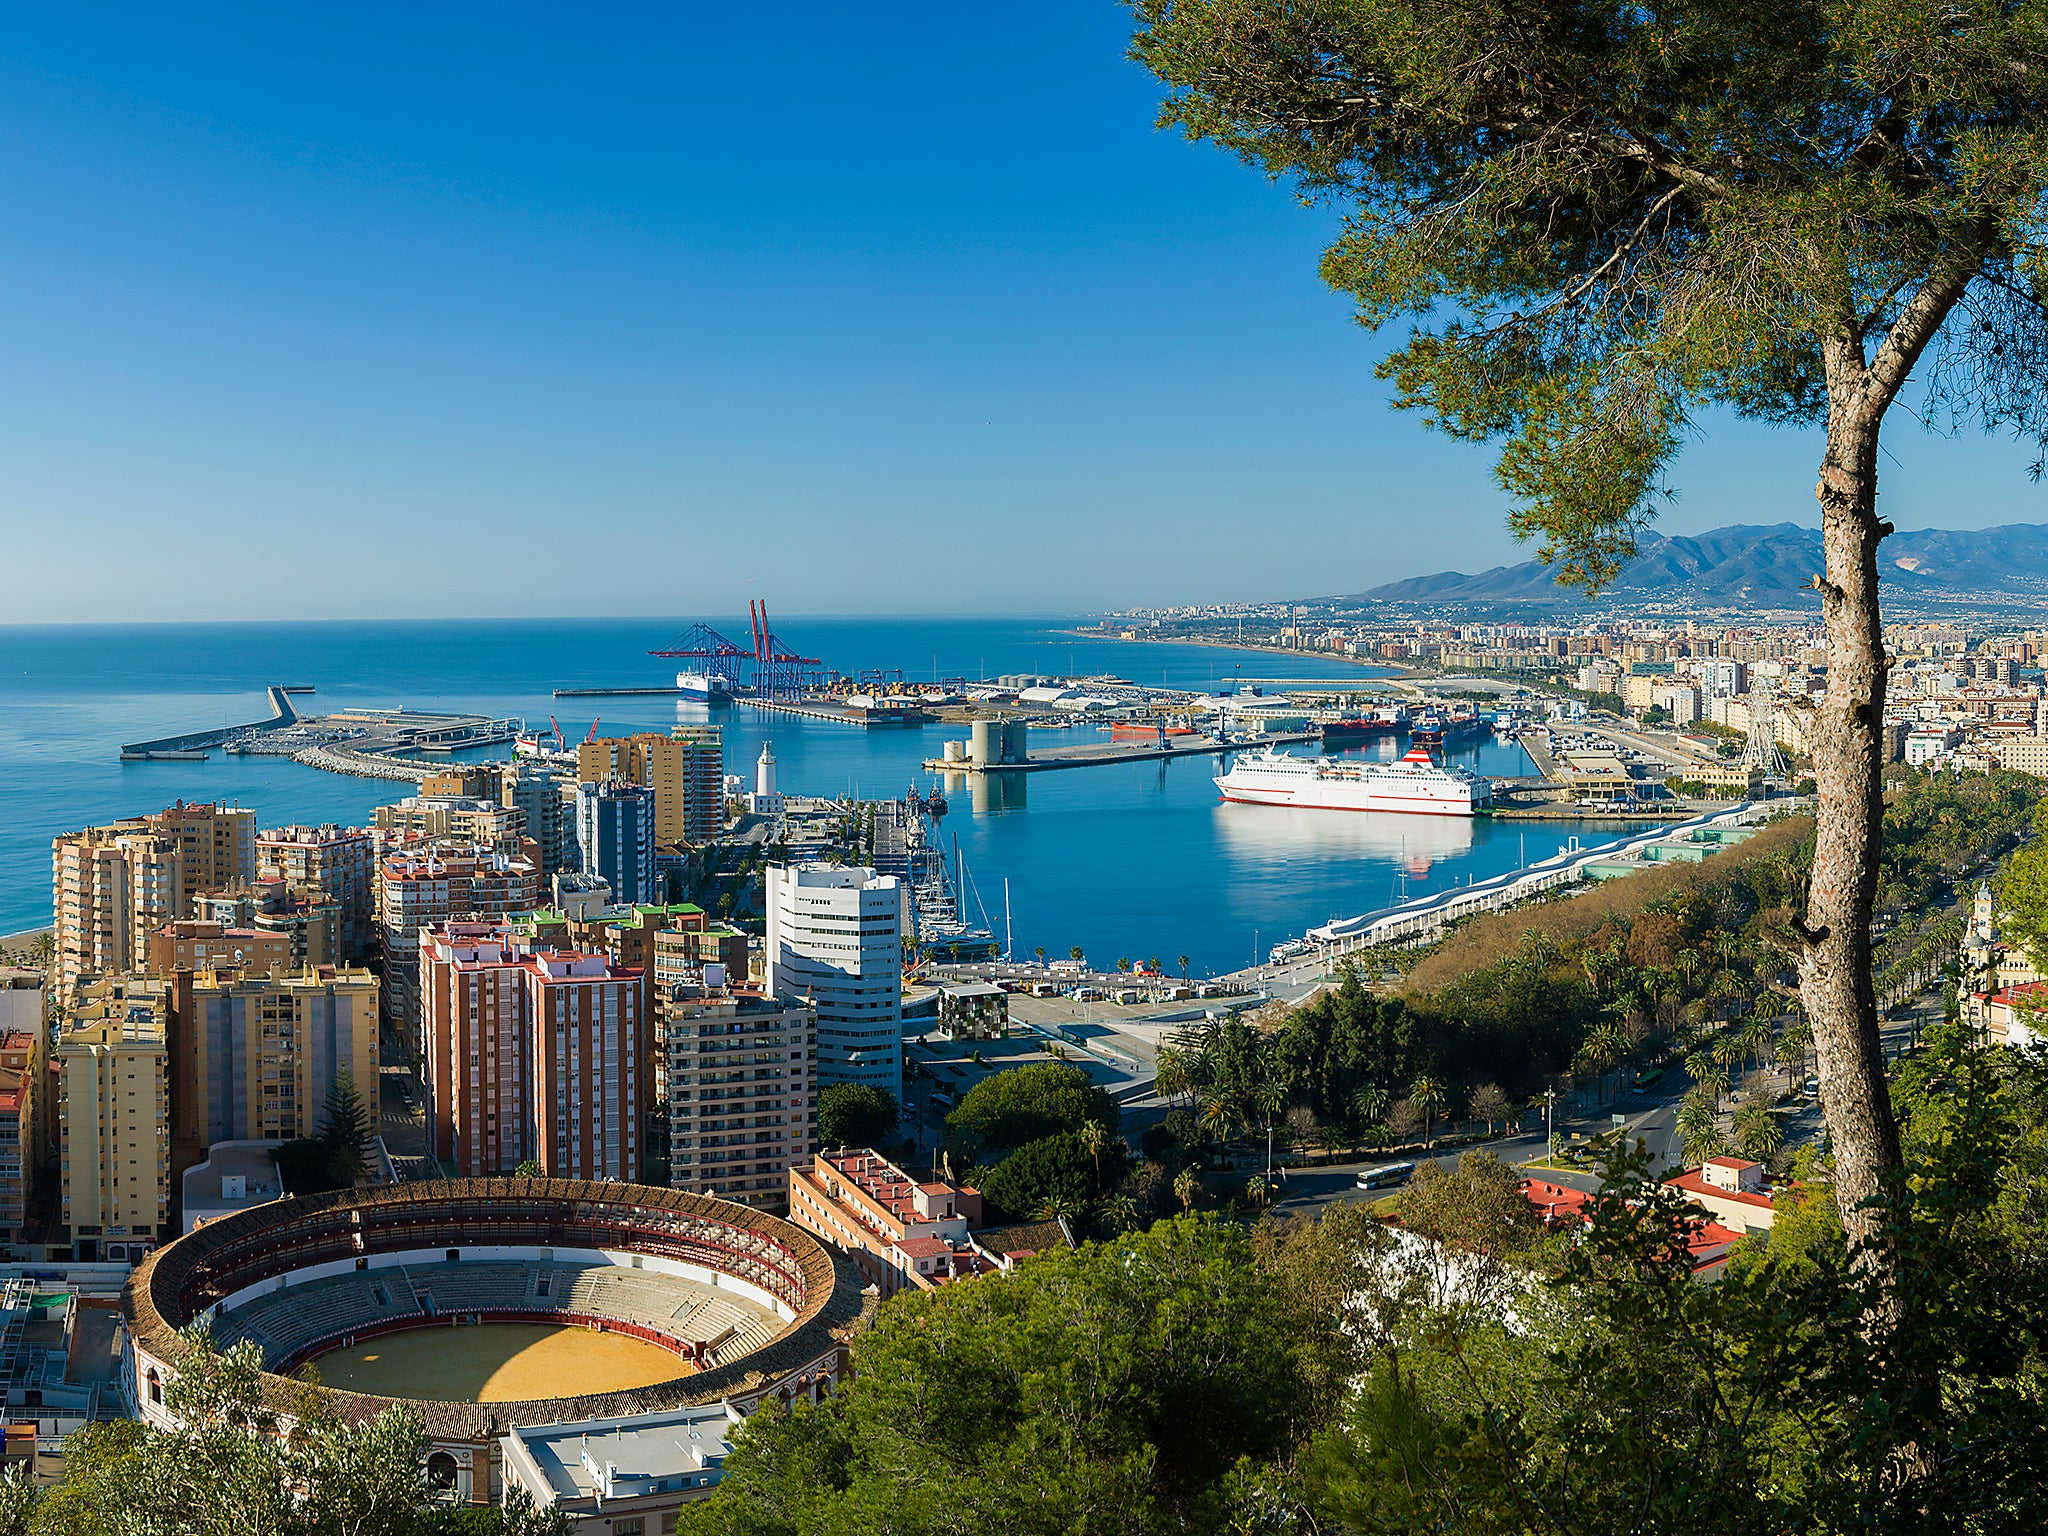 An aerial view of the city and harbour of Malaga in Andalucia, Spain